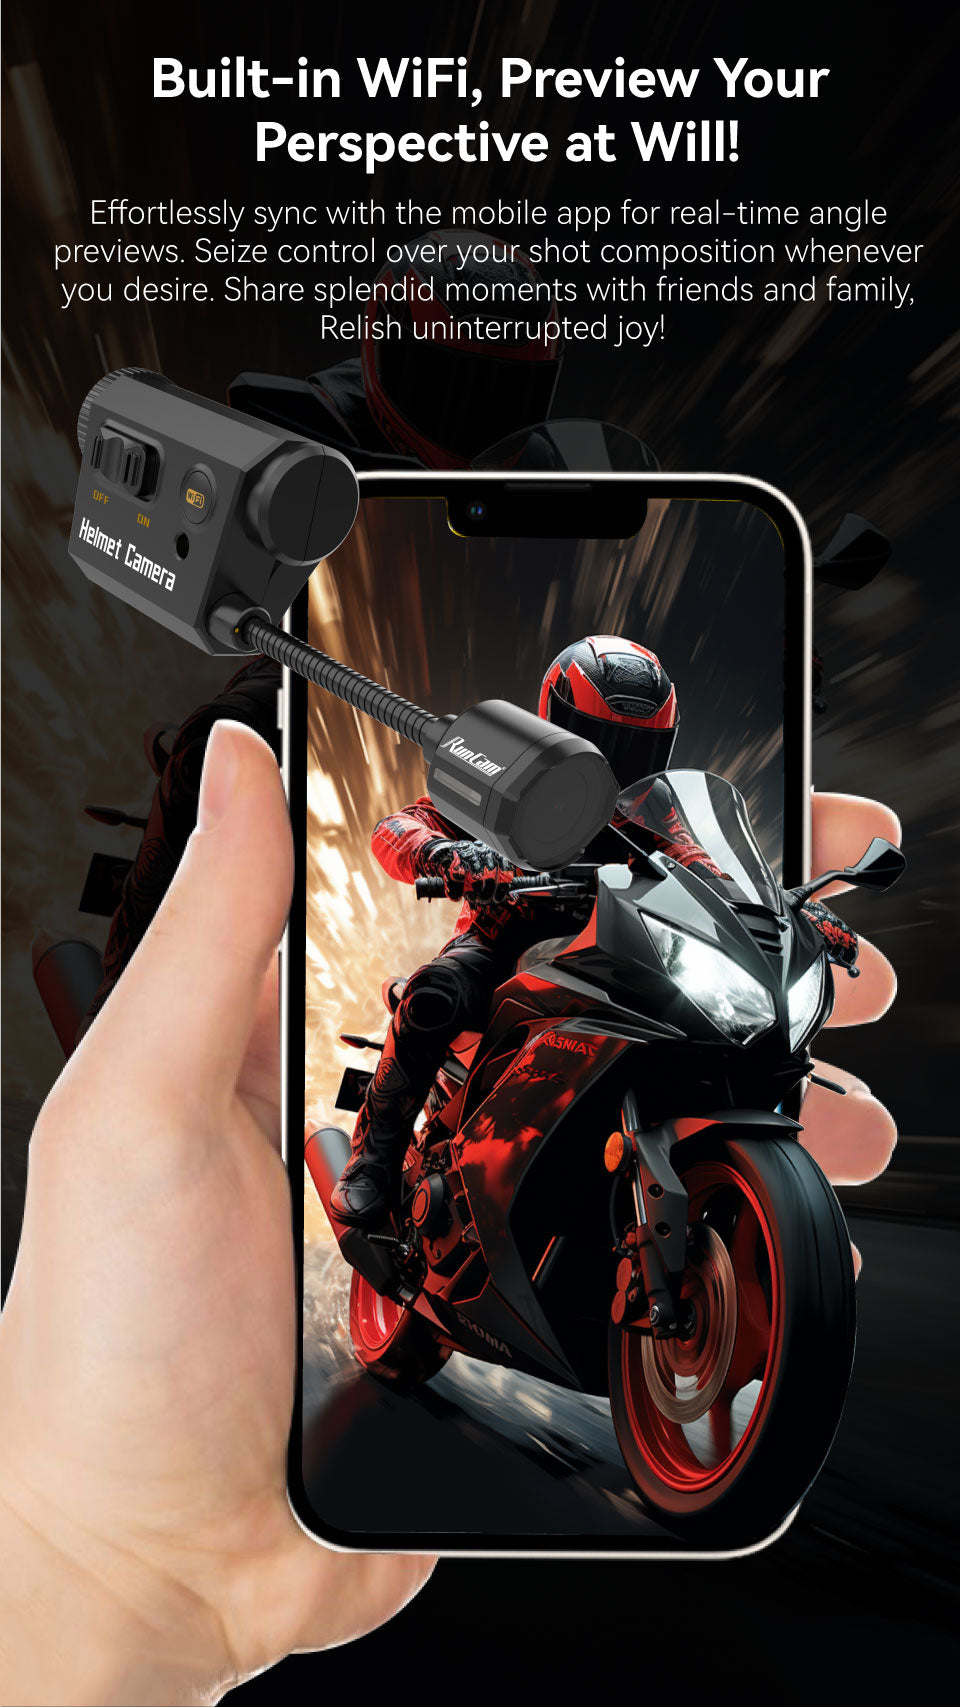 RunCam Helmet Camera, Sync with the mobile app for real-time angle previews . Share splendid moments with